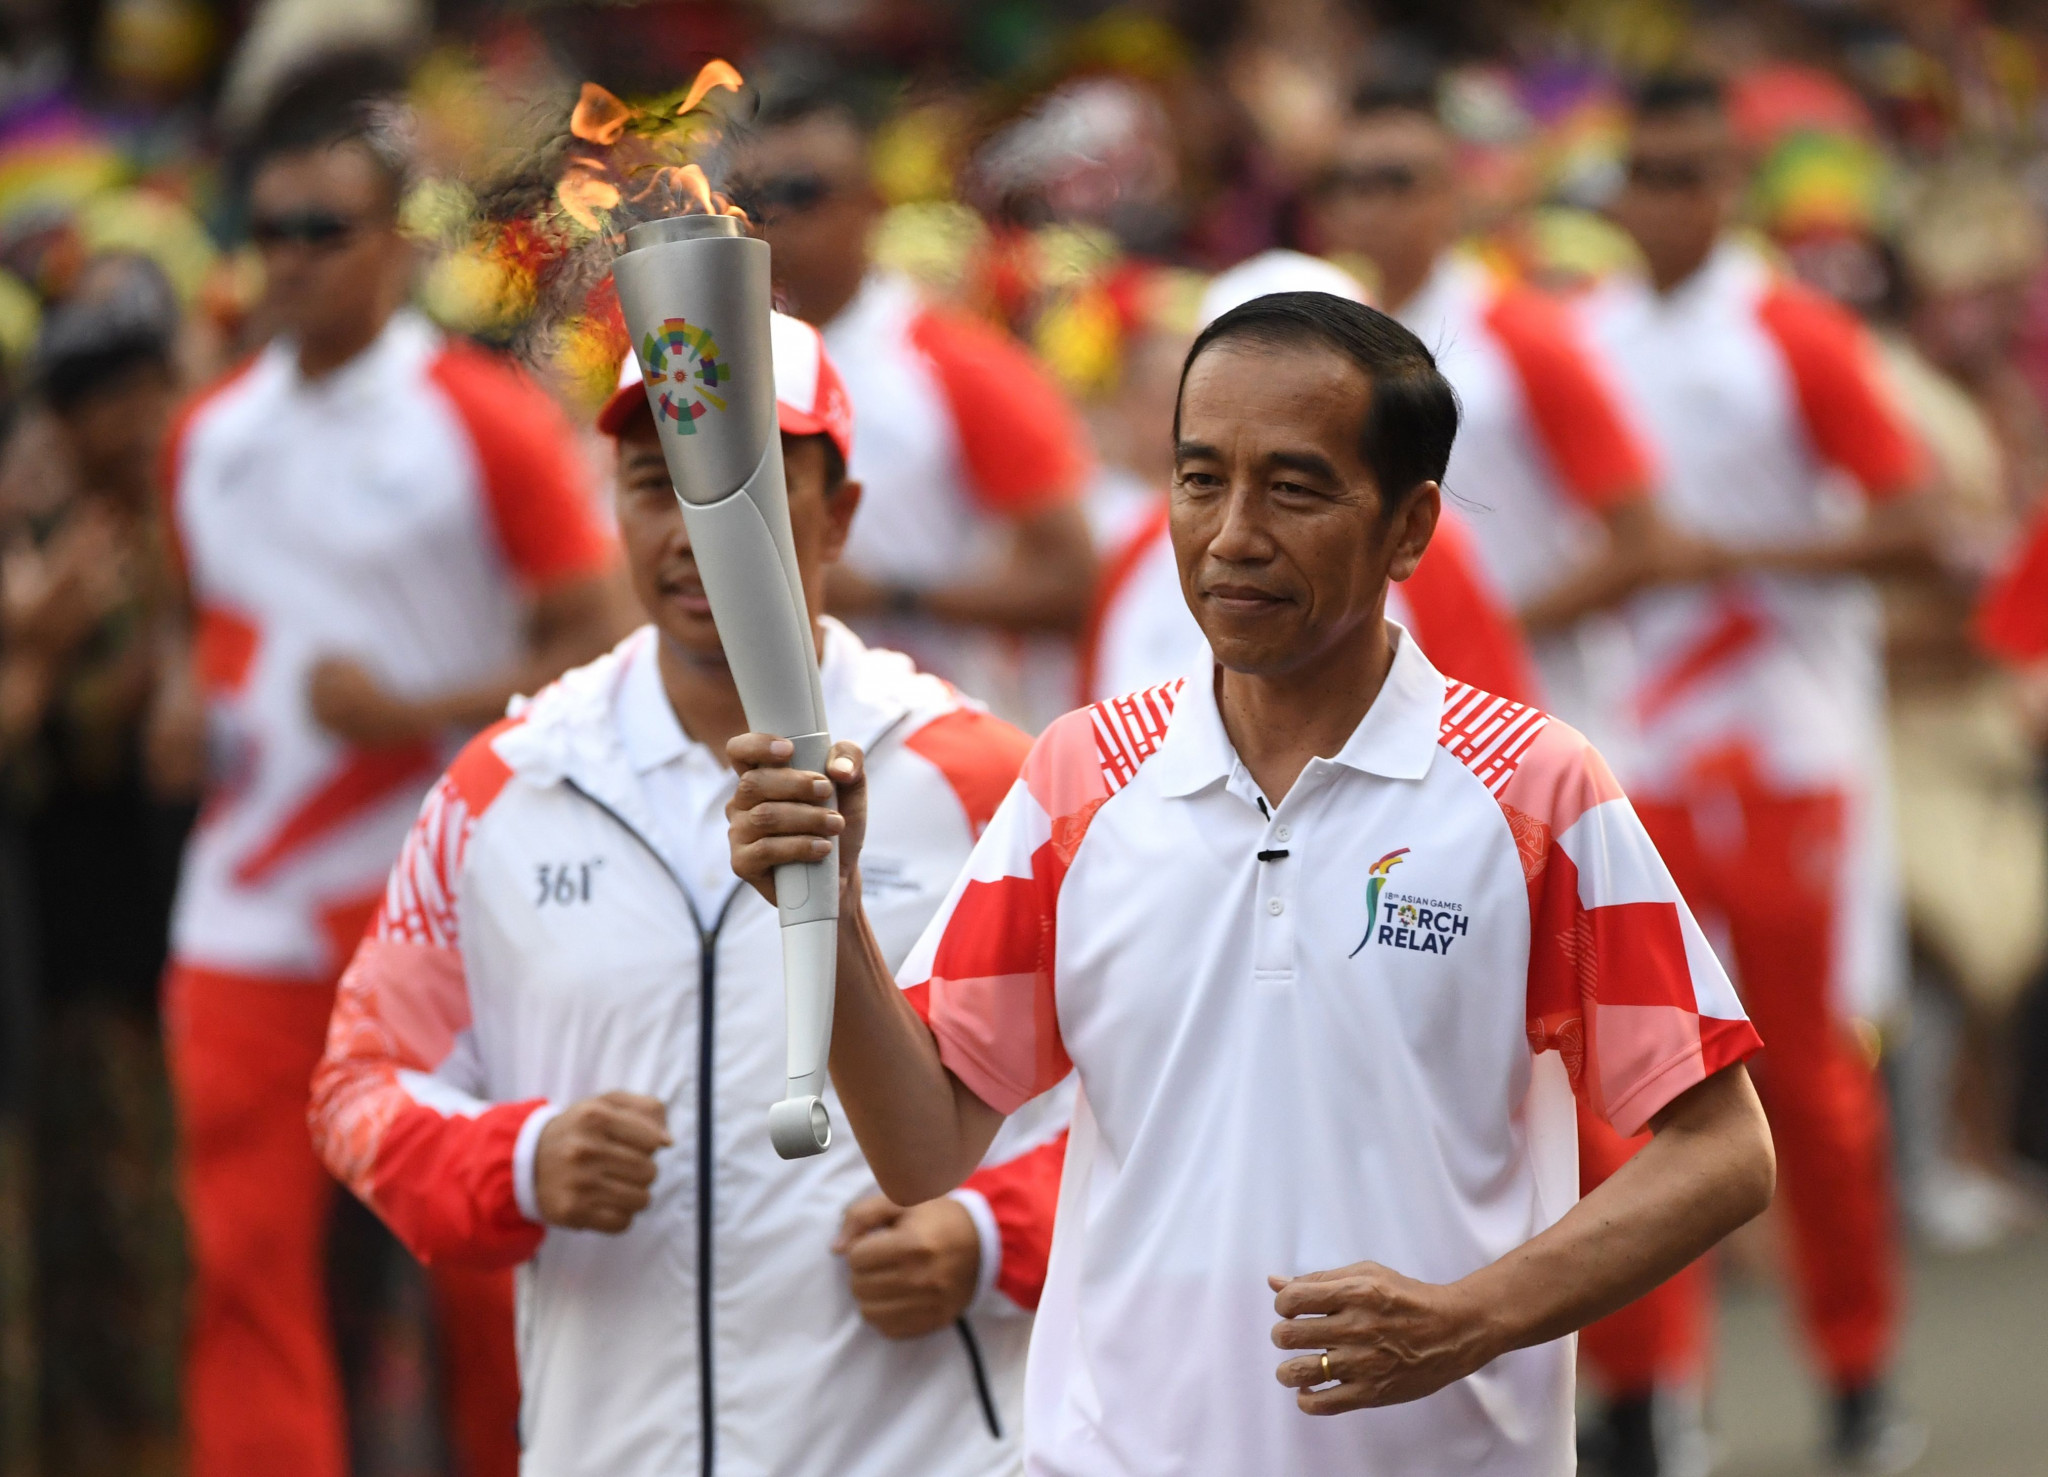 President Joko Widodo carried the Asian Games Torch when Indonesia hosted the event in 2018 ©Getty Images